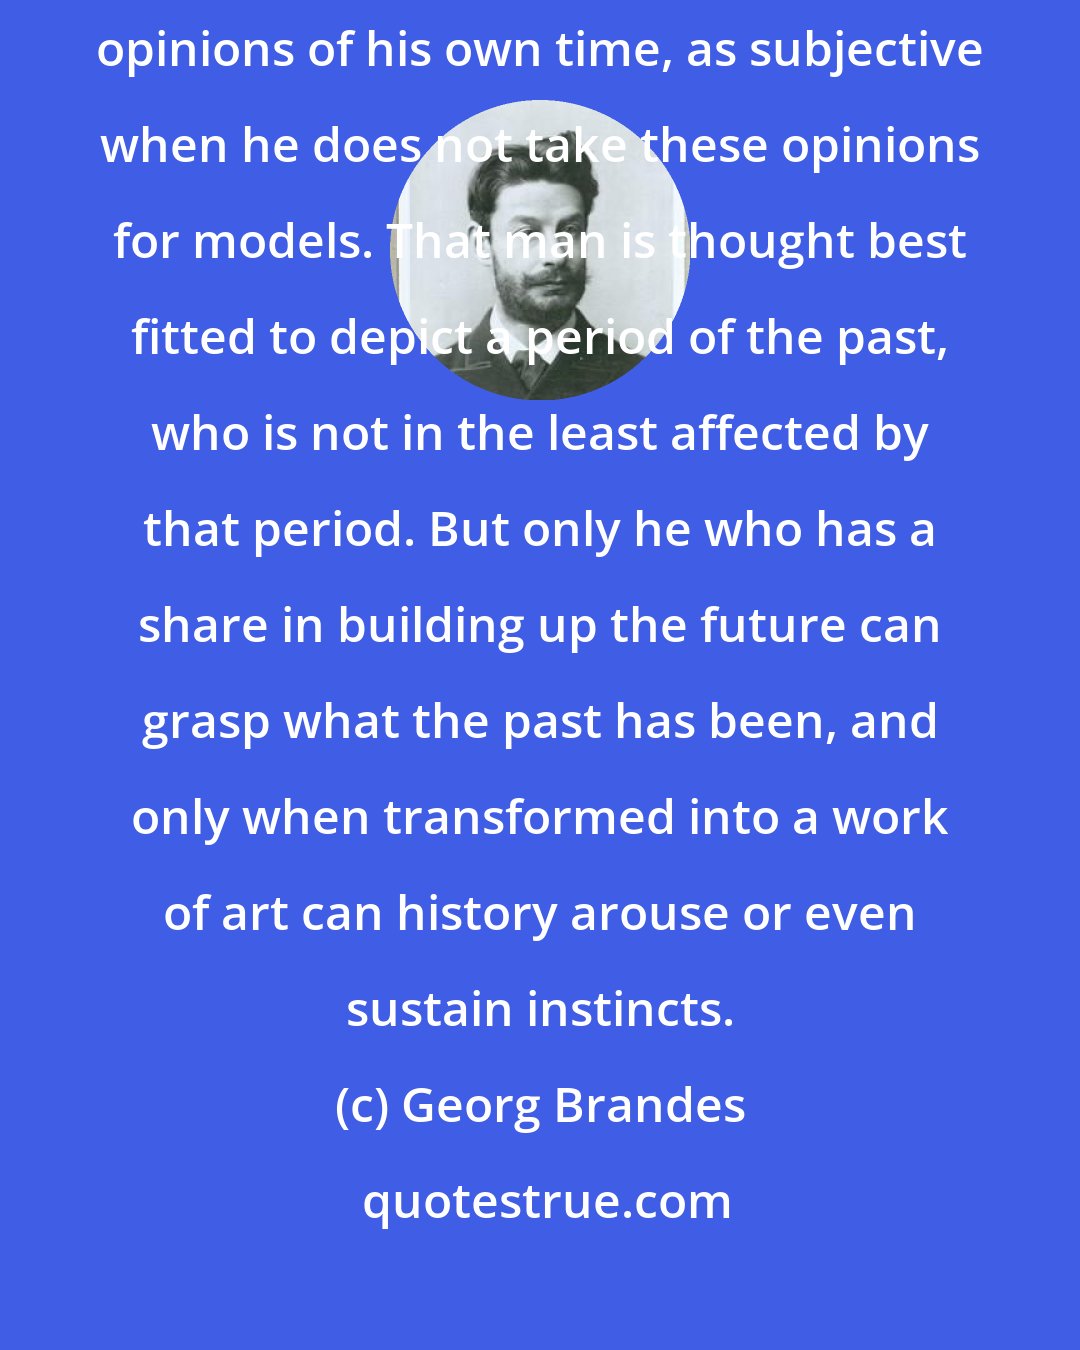 Georg Brandes: The historian is looked upon as objective when he measures the past by the popular opinions of his own time, as subjective when he does not take these opinions for models. That man is thought best fitted to depict a period of the past, who is not in the least affected by that period. But only he who has a share in building up the future can grasp what the past has been, and only when transformed into a work of art can history arouse or even sustain instincts.